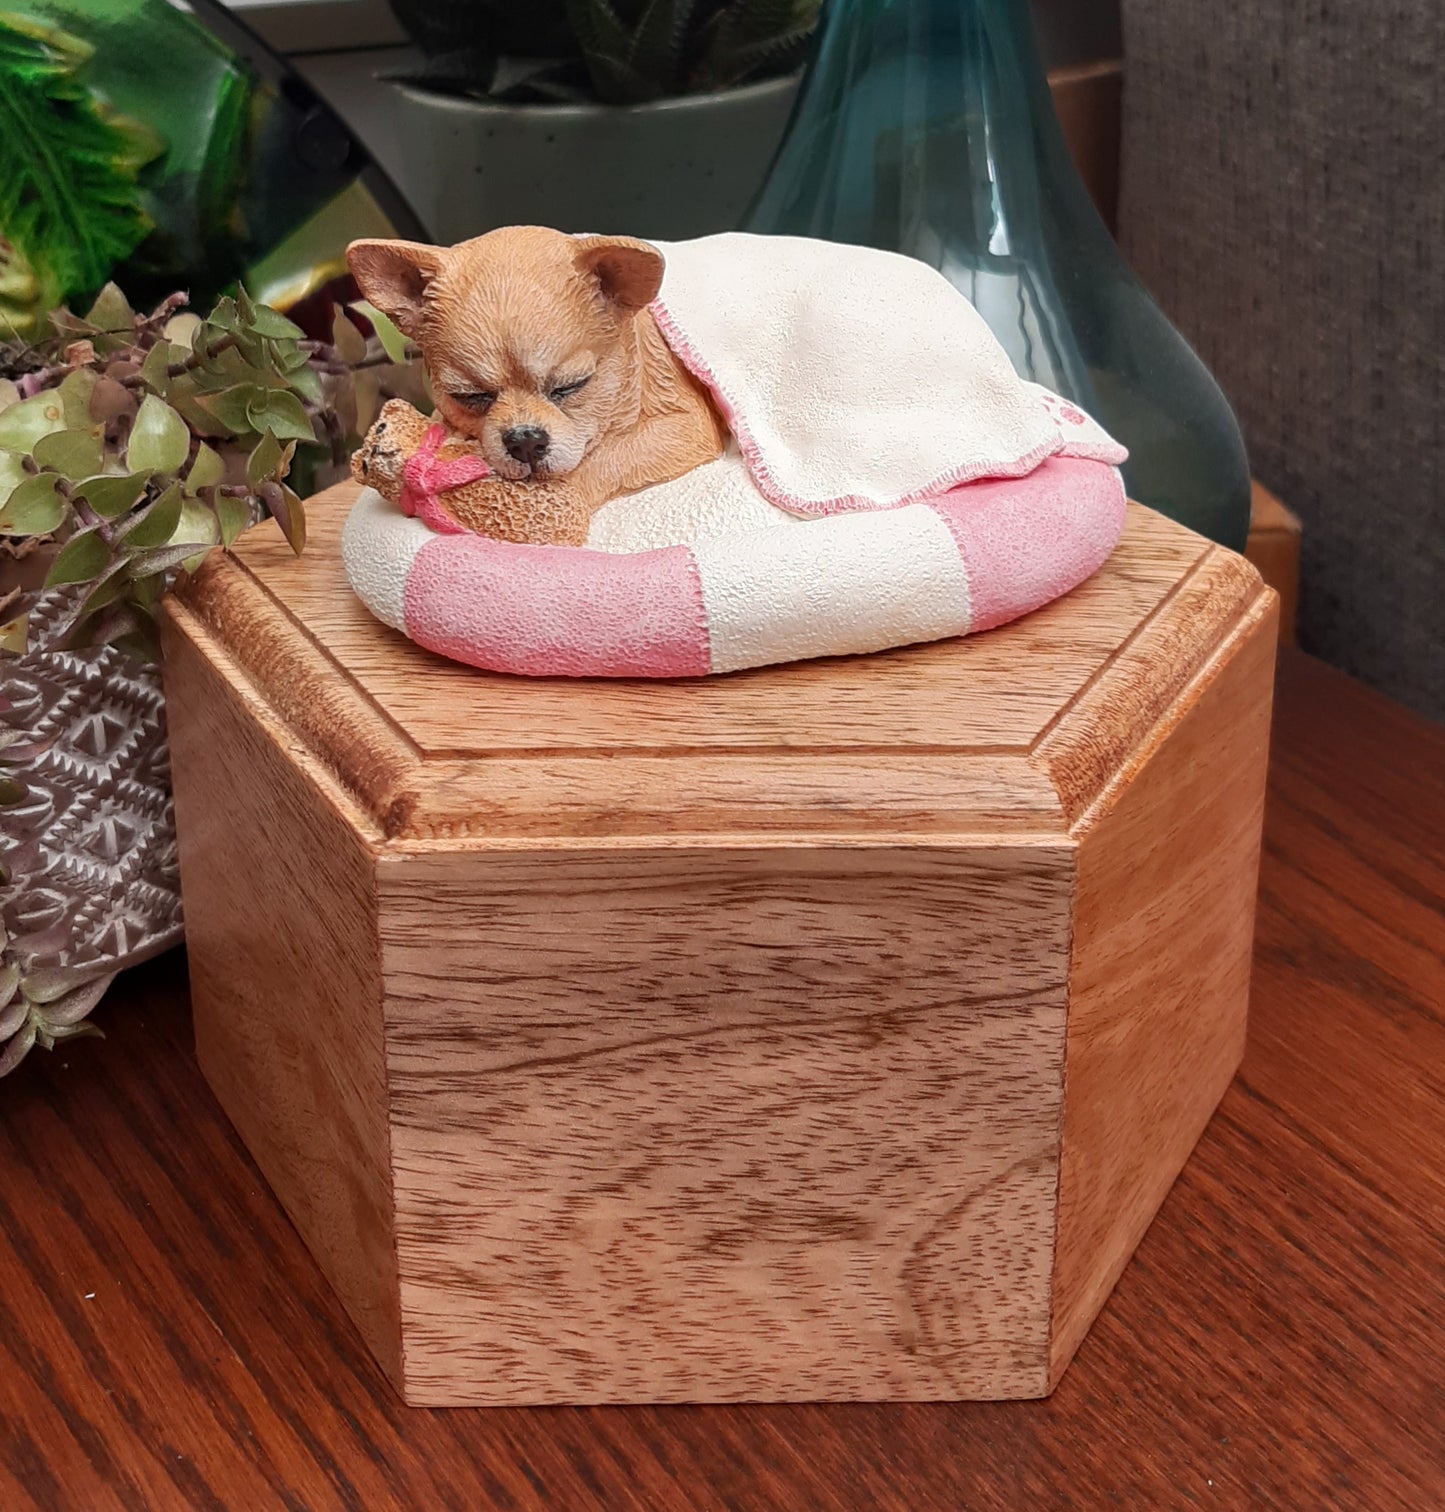 Wooden Cremation Urn For Short Coated Chihuahua Pet Ashes